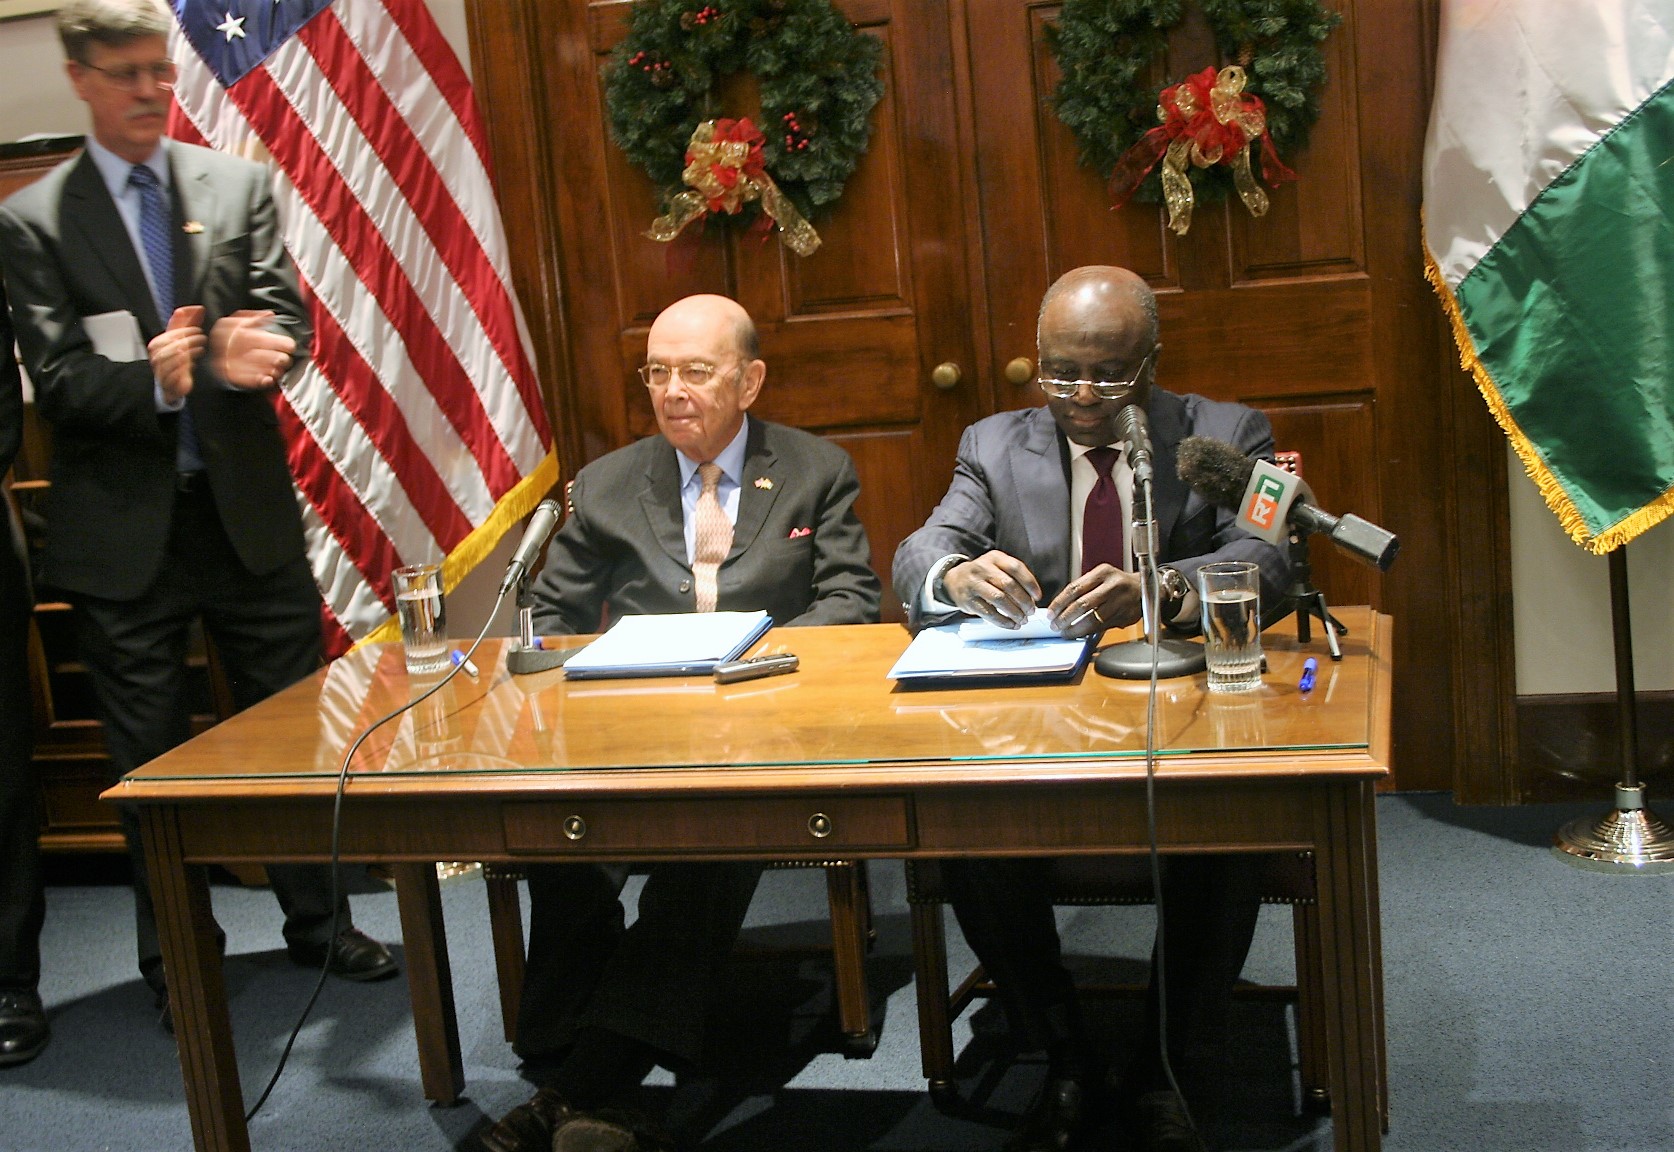 Washington , DC: The Best Photos From  U.S.-Cote d’Ivoire MOU Signing Ceremony.Oh ......Yes Cote d'Ivoire is Back!